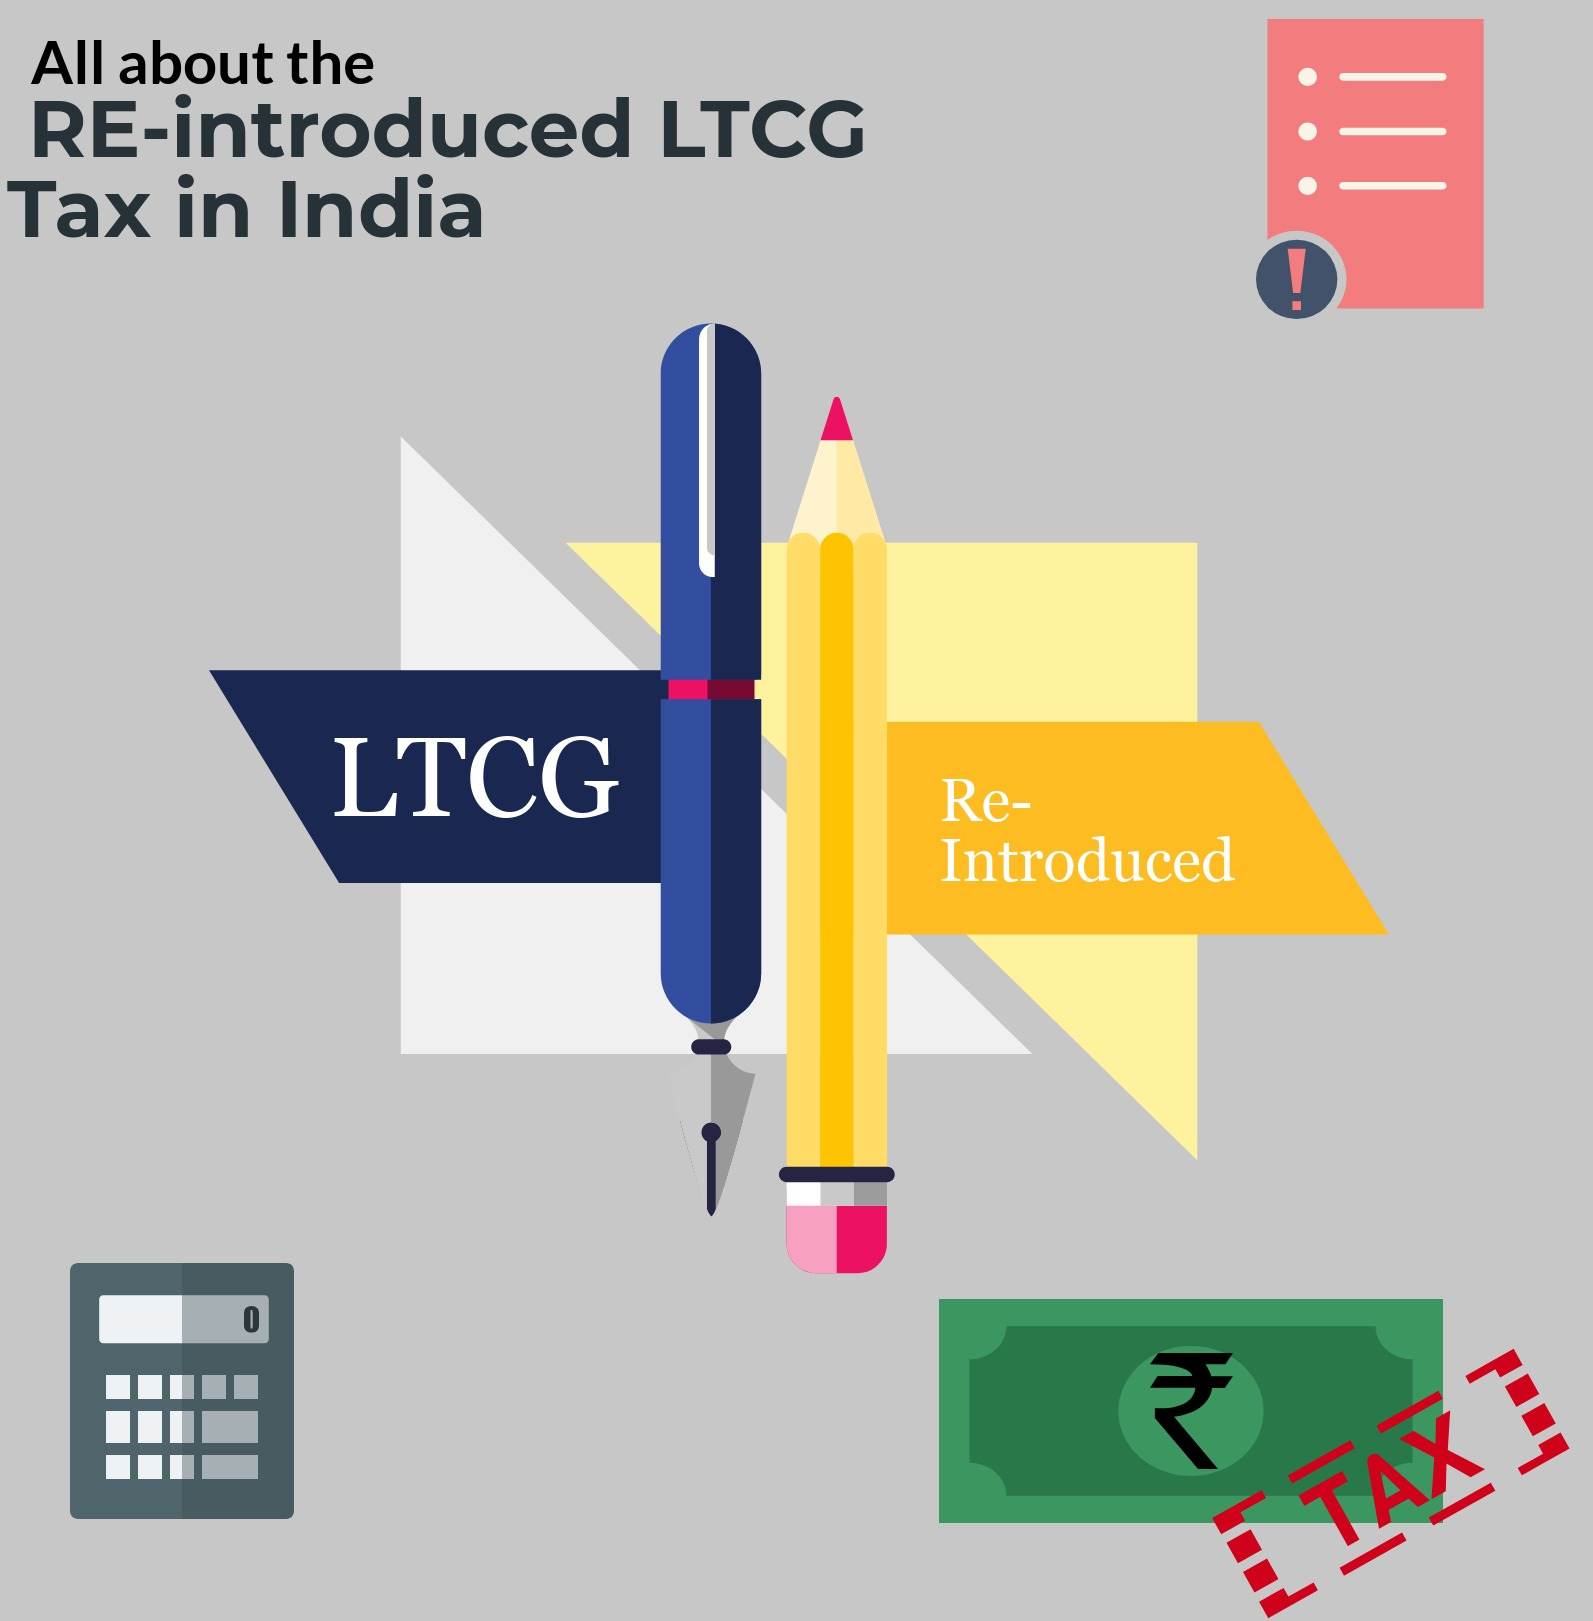 All about the re-introduced Long Term Capital Gains Tax (LTCG tax) in India 1